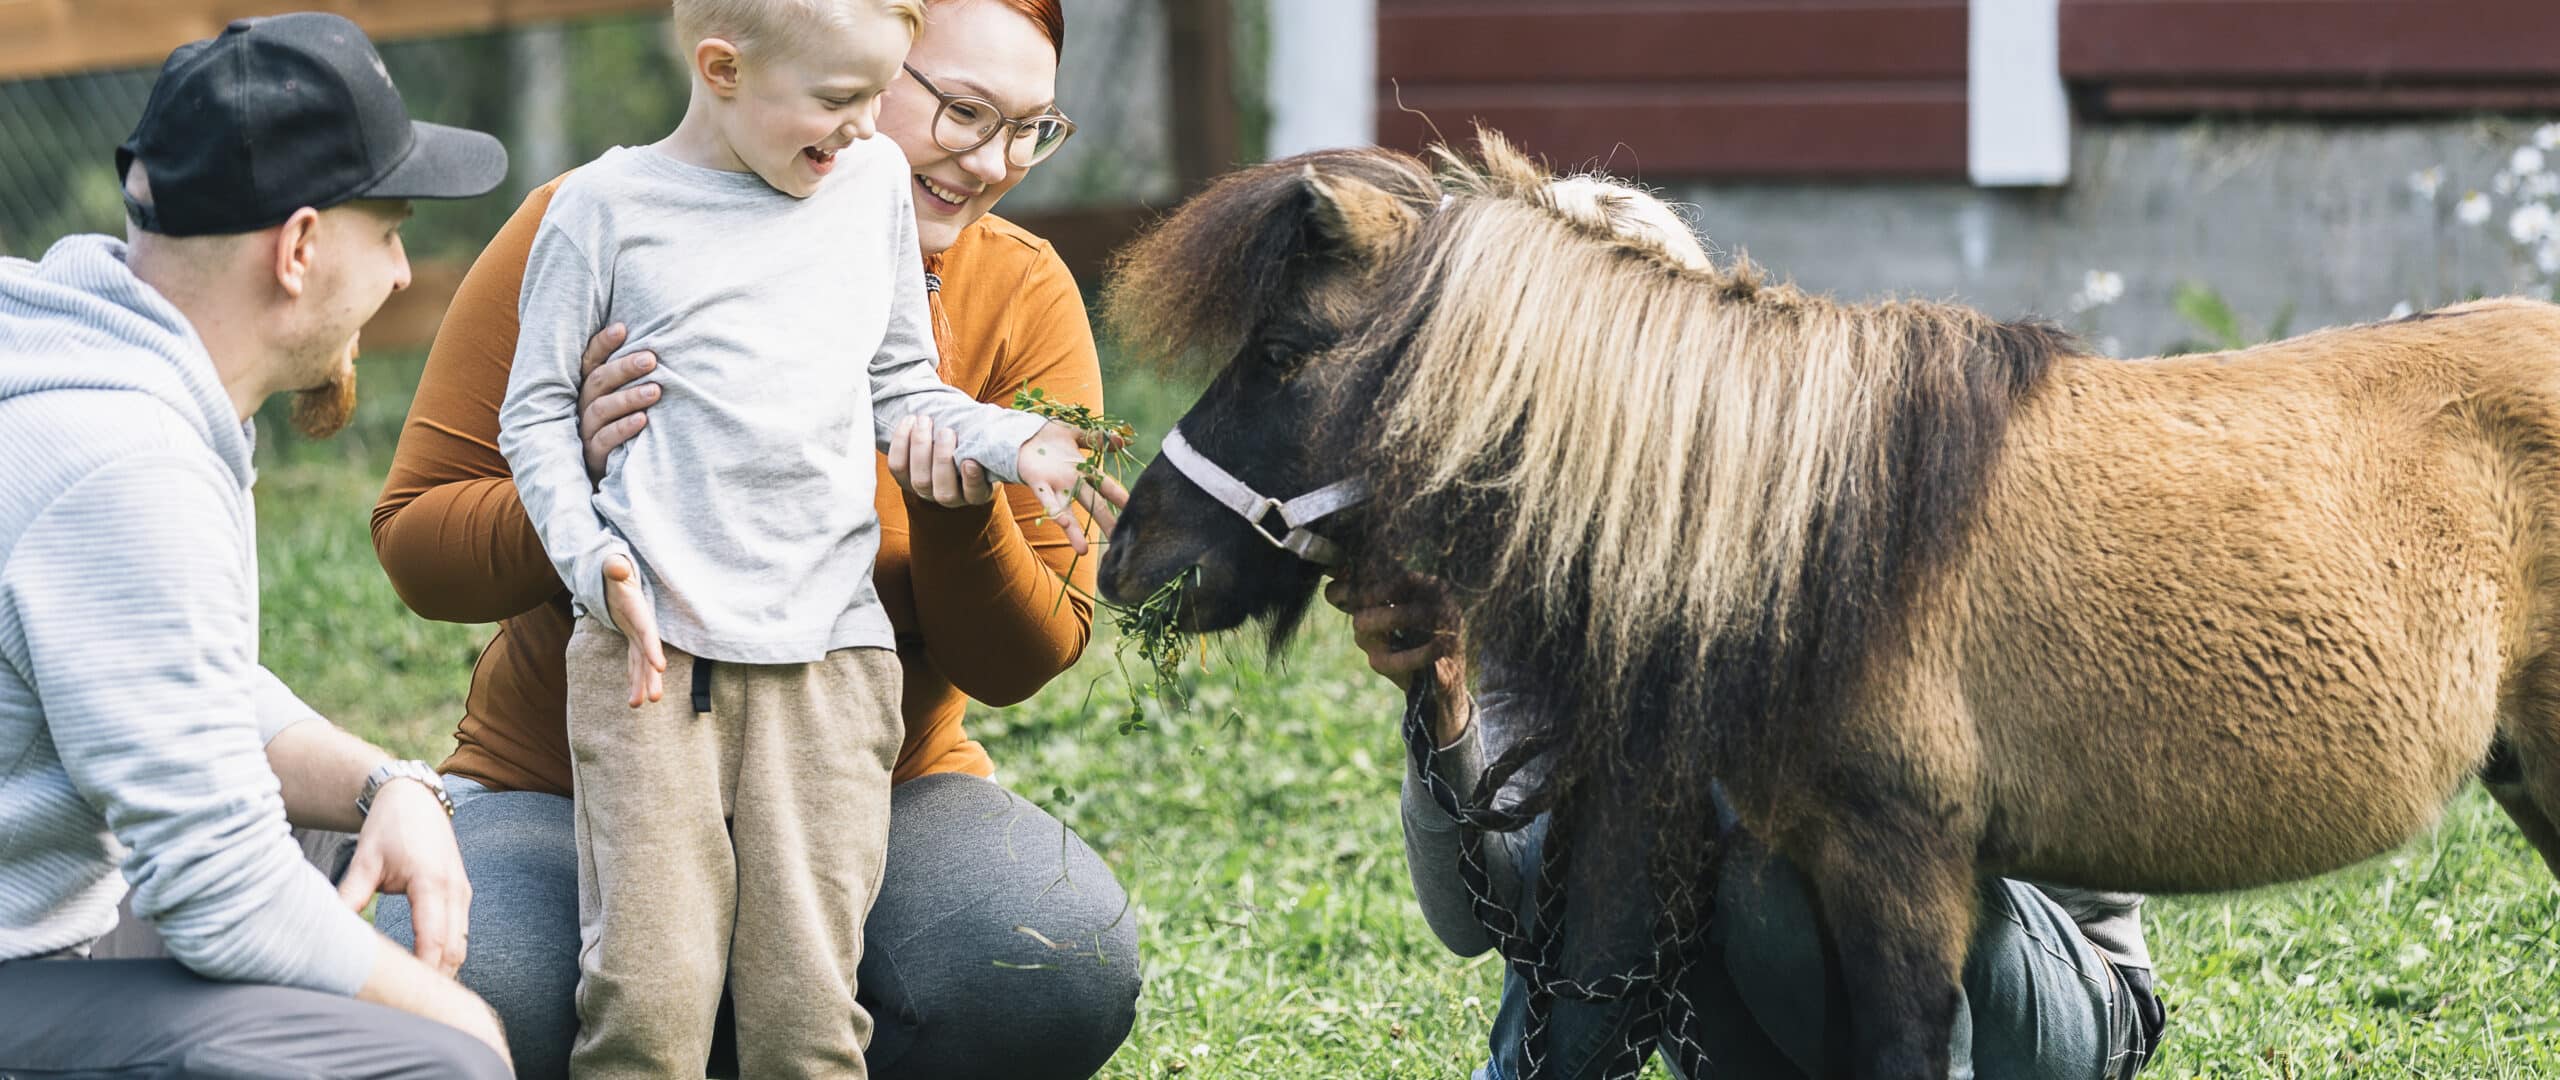 Child petting a small horse.